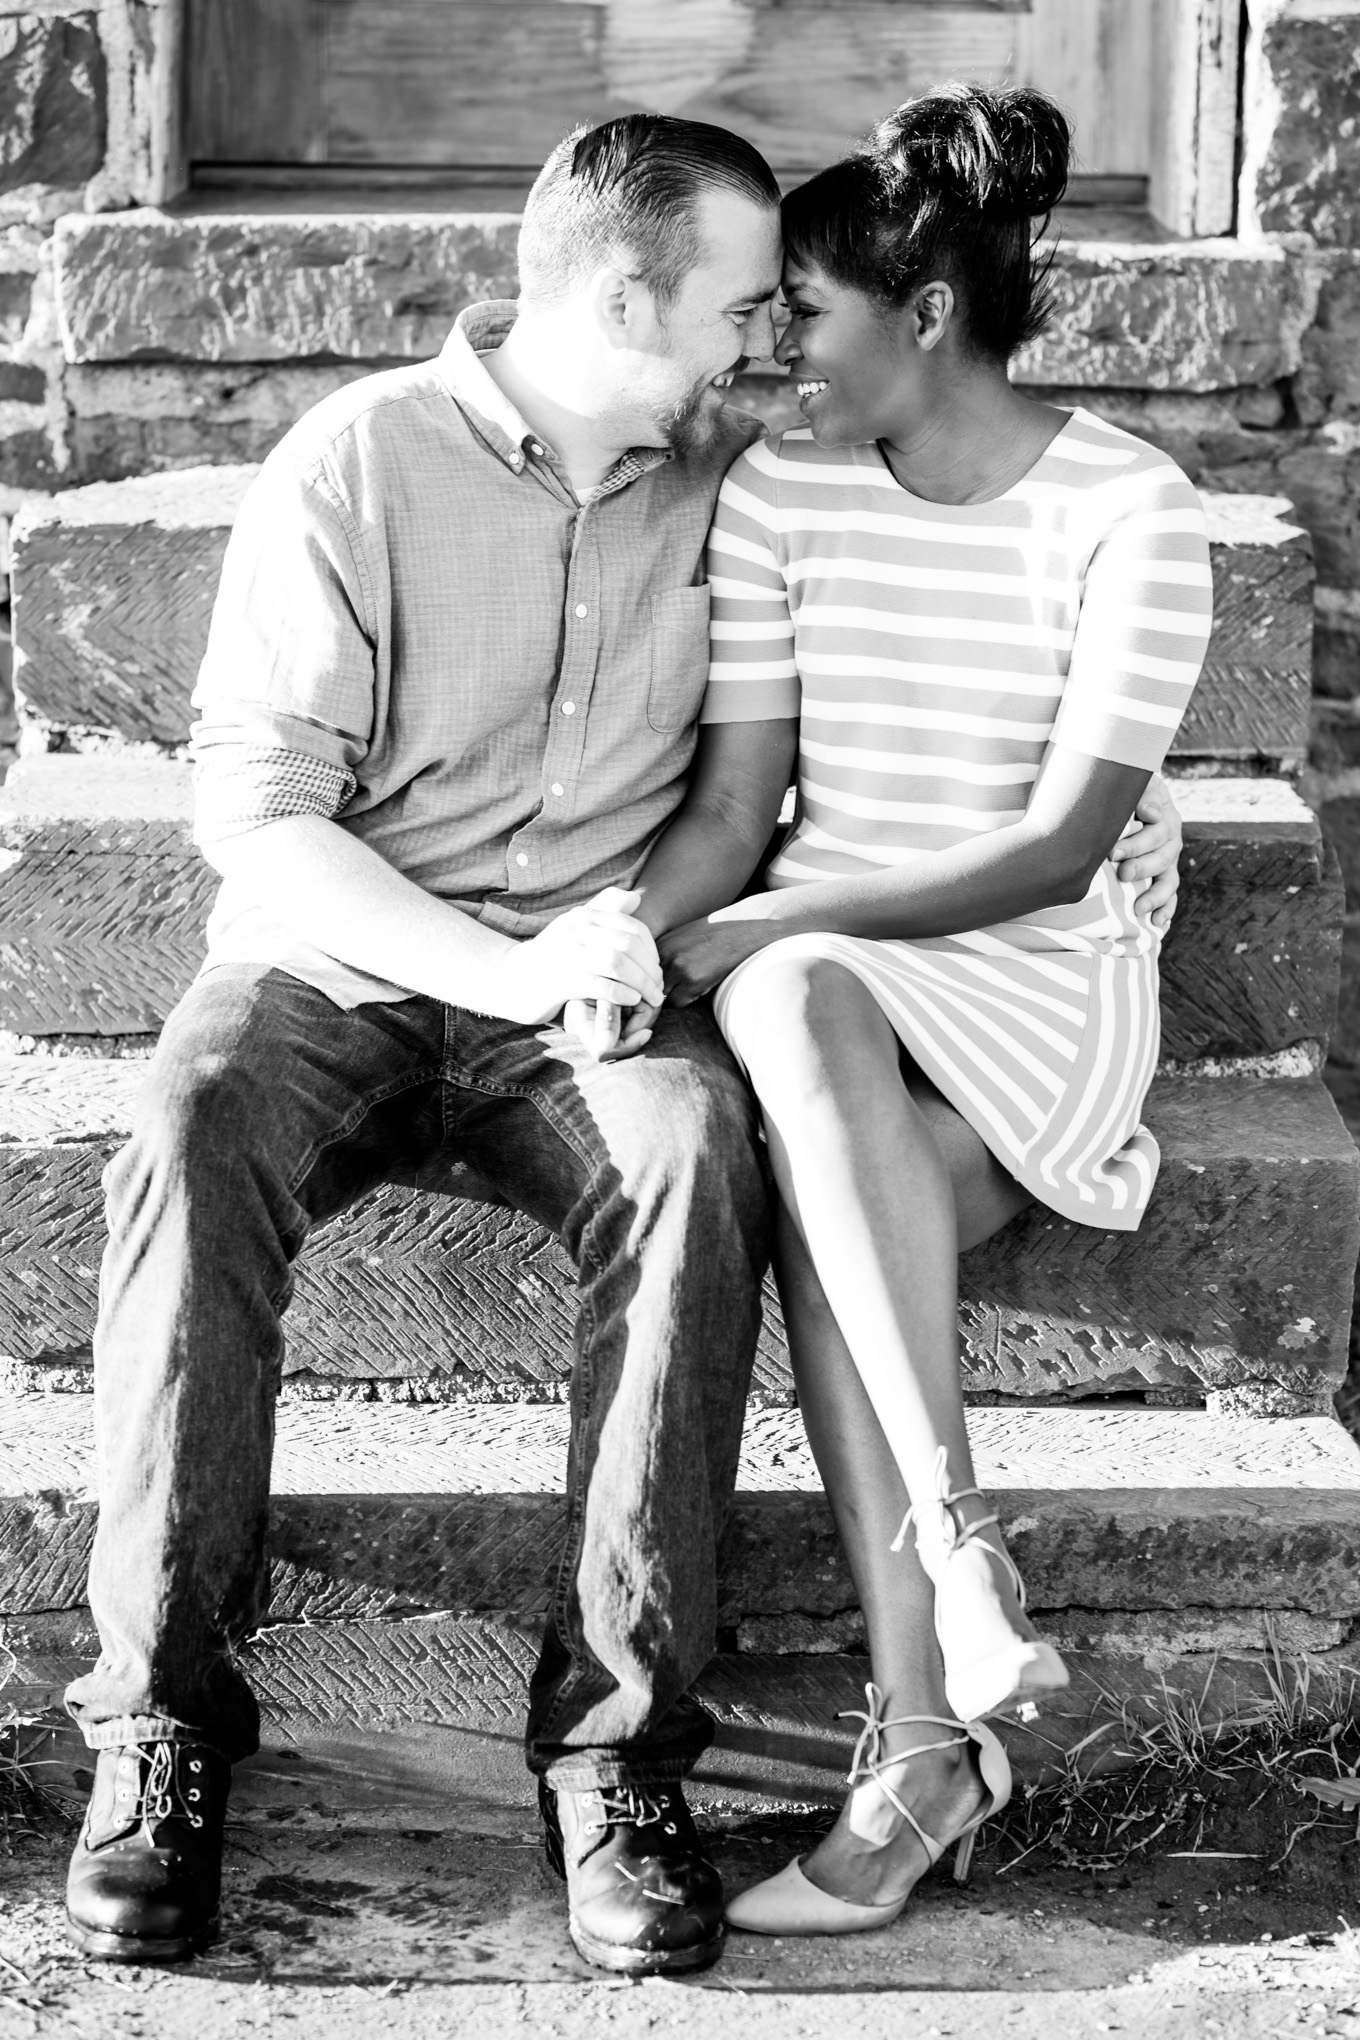 stone house engagement session, Manassas, Manassas National Battlefield Park, battlefield, outdoor engagement photos, engagement photos, Virginia engagement photos, Virginia engagement photographer, northern Virginia, northern Virginia engagement photographer, Manassas photographer, Manassas engagement photographer, natural light engagement photos, magic hour portraits, morning magic hour, engagement photos poses, engagement photos ideas, black and white, stone steps, strappy heeled shoes